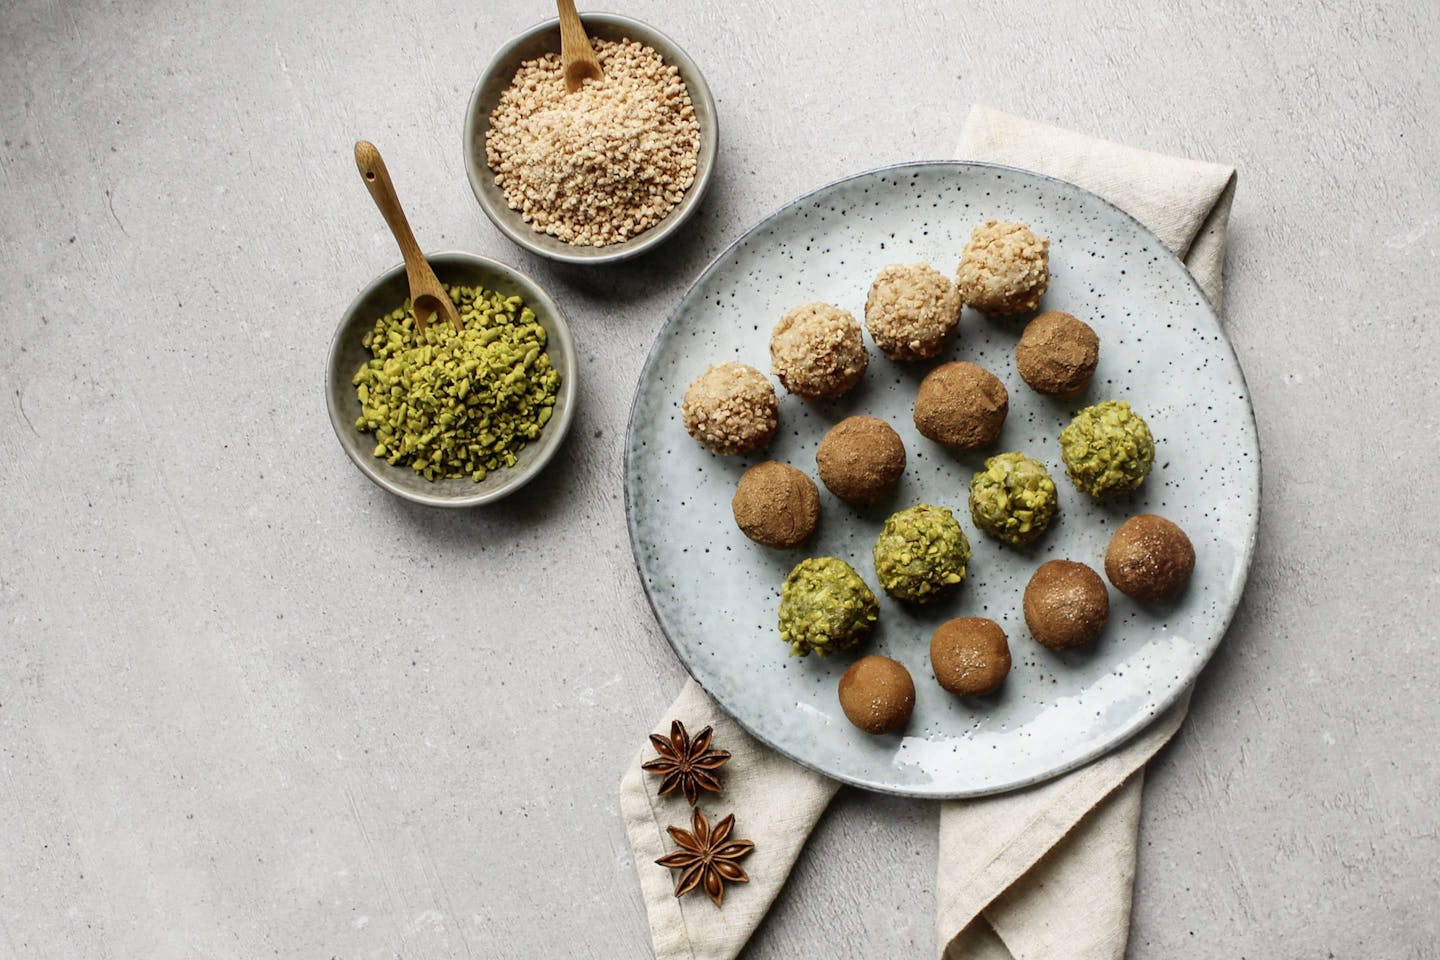 Marzipan balls with bourbon vanilla sugar on a light blue plate with 2 bowls full of pistachios and hazelnut brittle